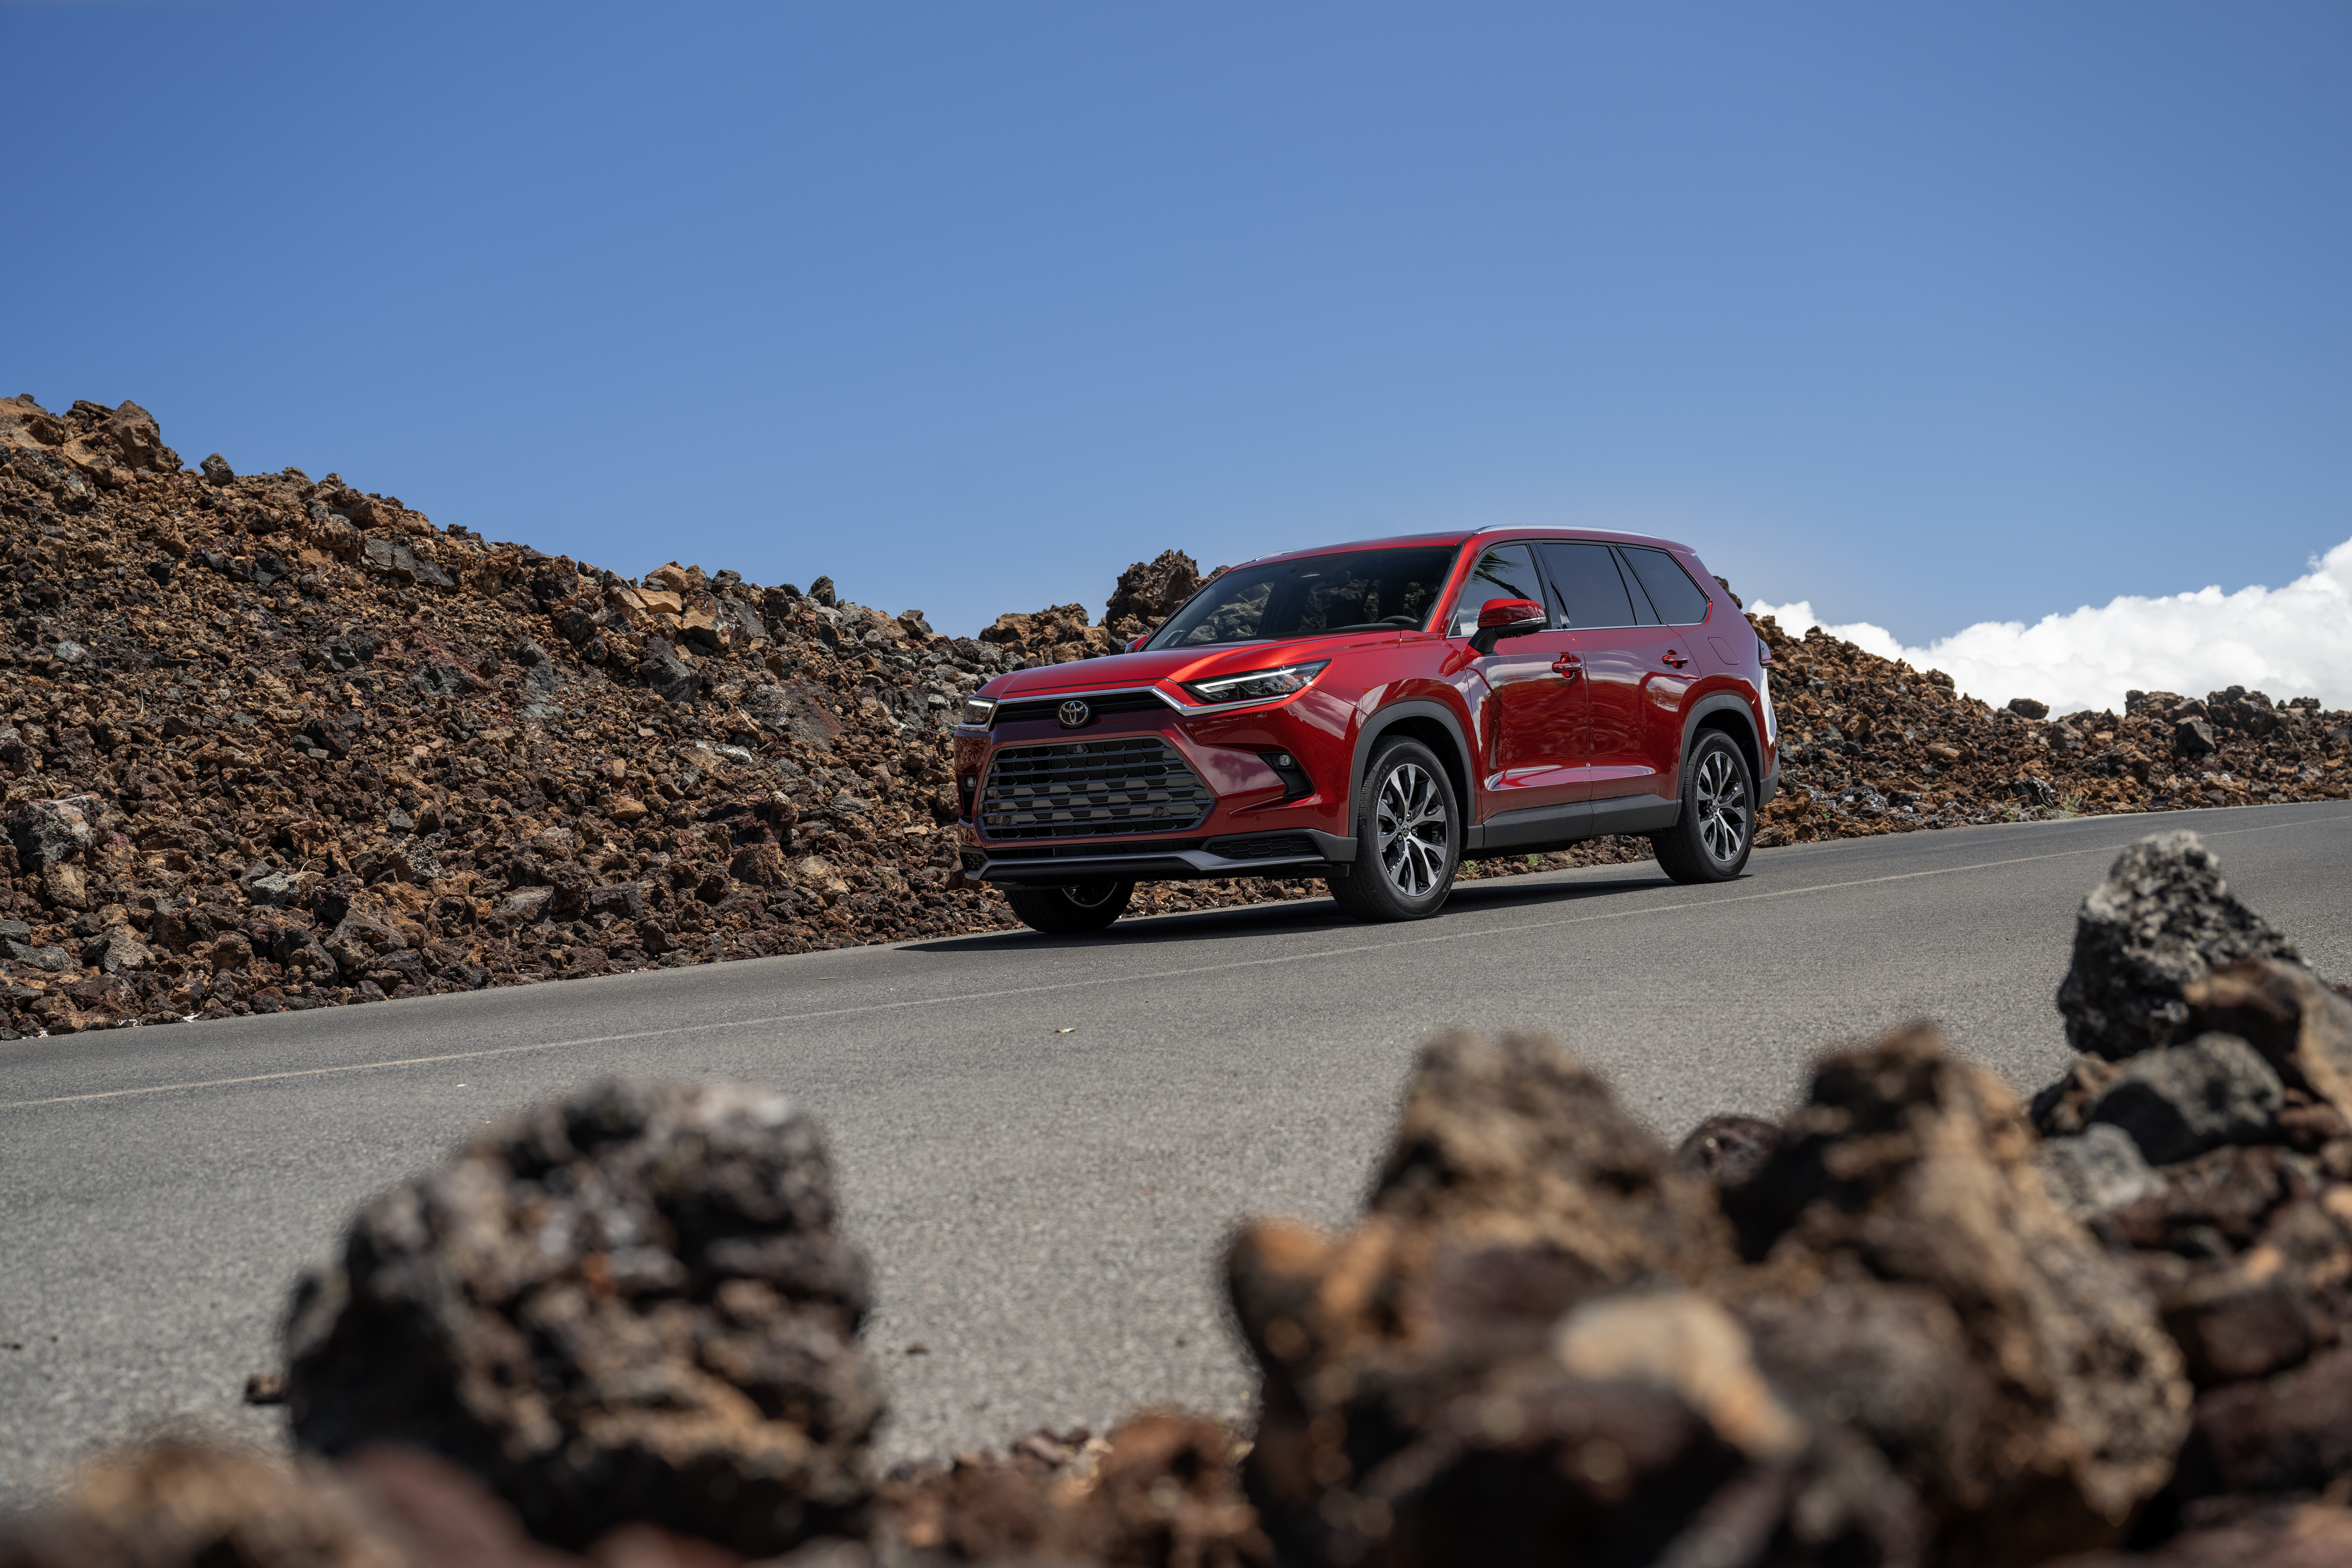 Best and worst years for the Toyota Highlander: image shows a red Toyota Highlander against a rocky background